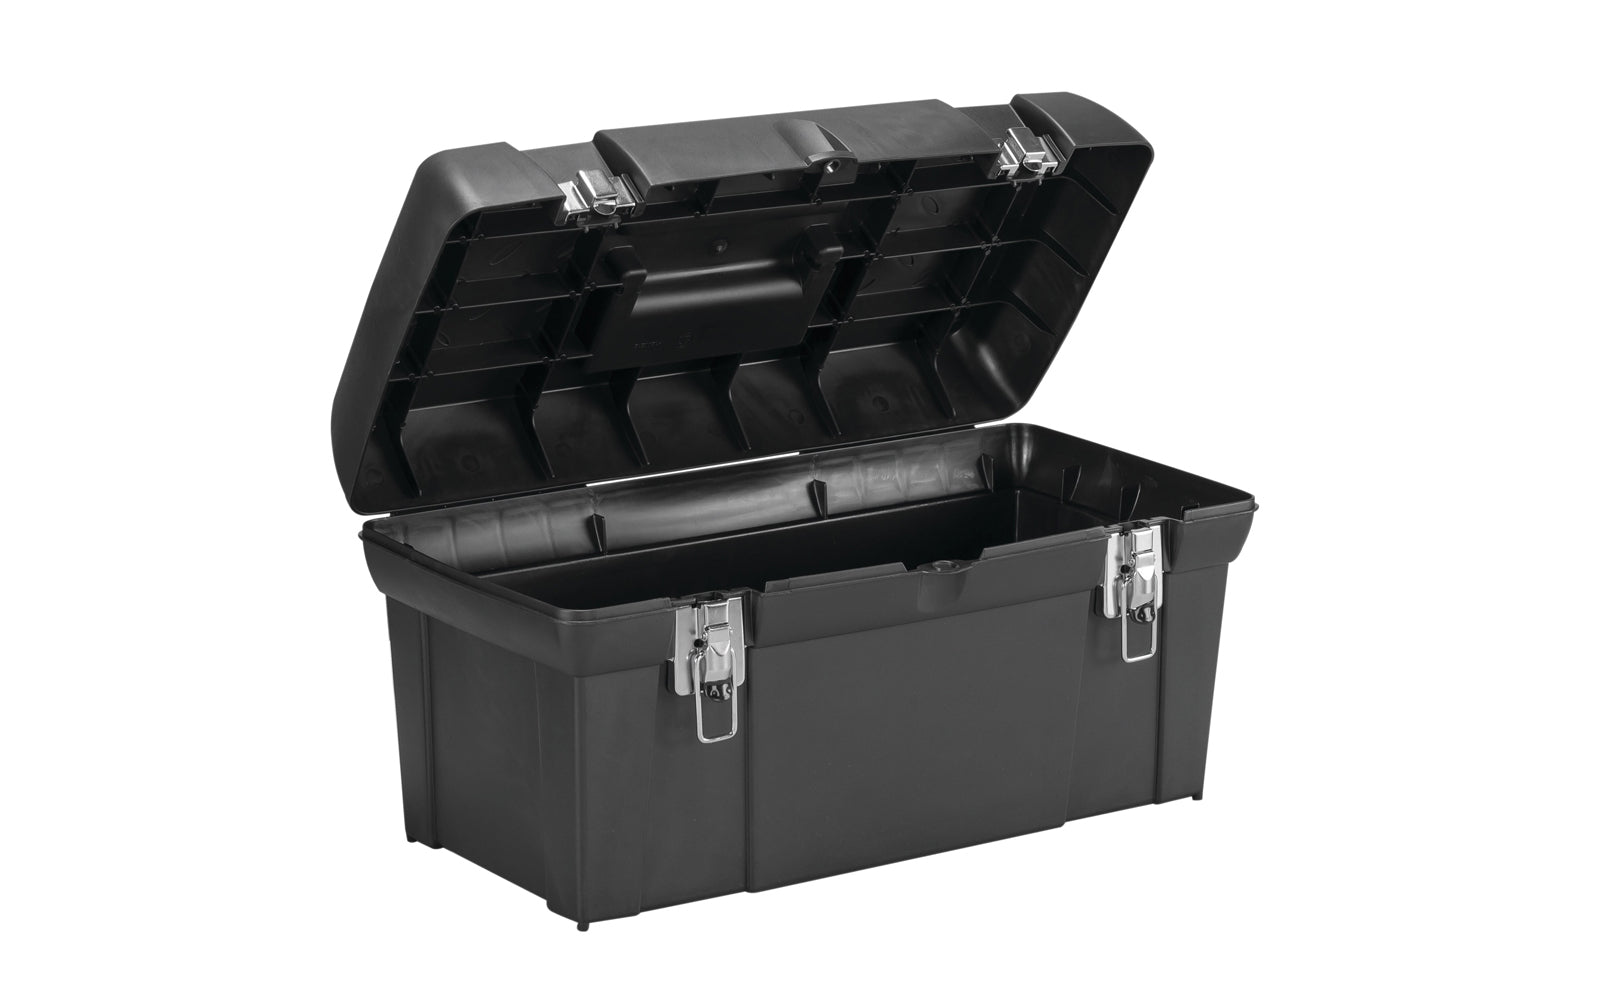 Stanley 19" Toolbox Model No. STST19005 features metal latches, builtin organizers & removable tray. Slot for exterior padlock helps ensure contents are secure. Overall size:  19-3/8"  Long  x  9-5/8"  High  x  9-7/8"  Deep. Made of plastic material. 076174928983. Made in USA. Removable tool tray with handle 